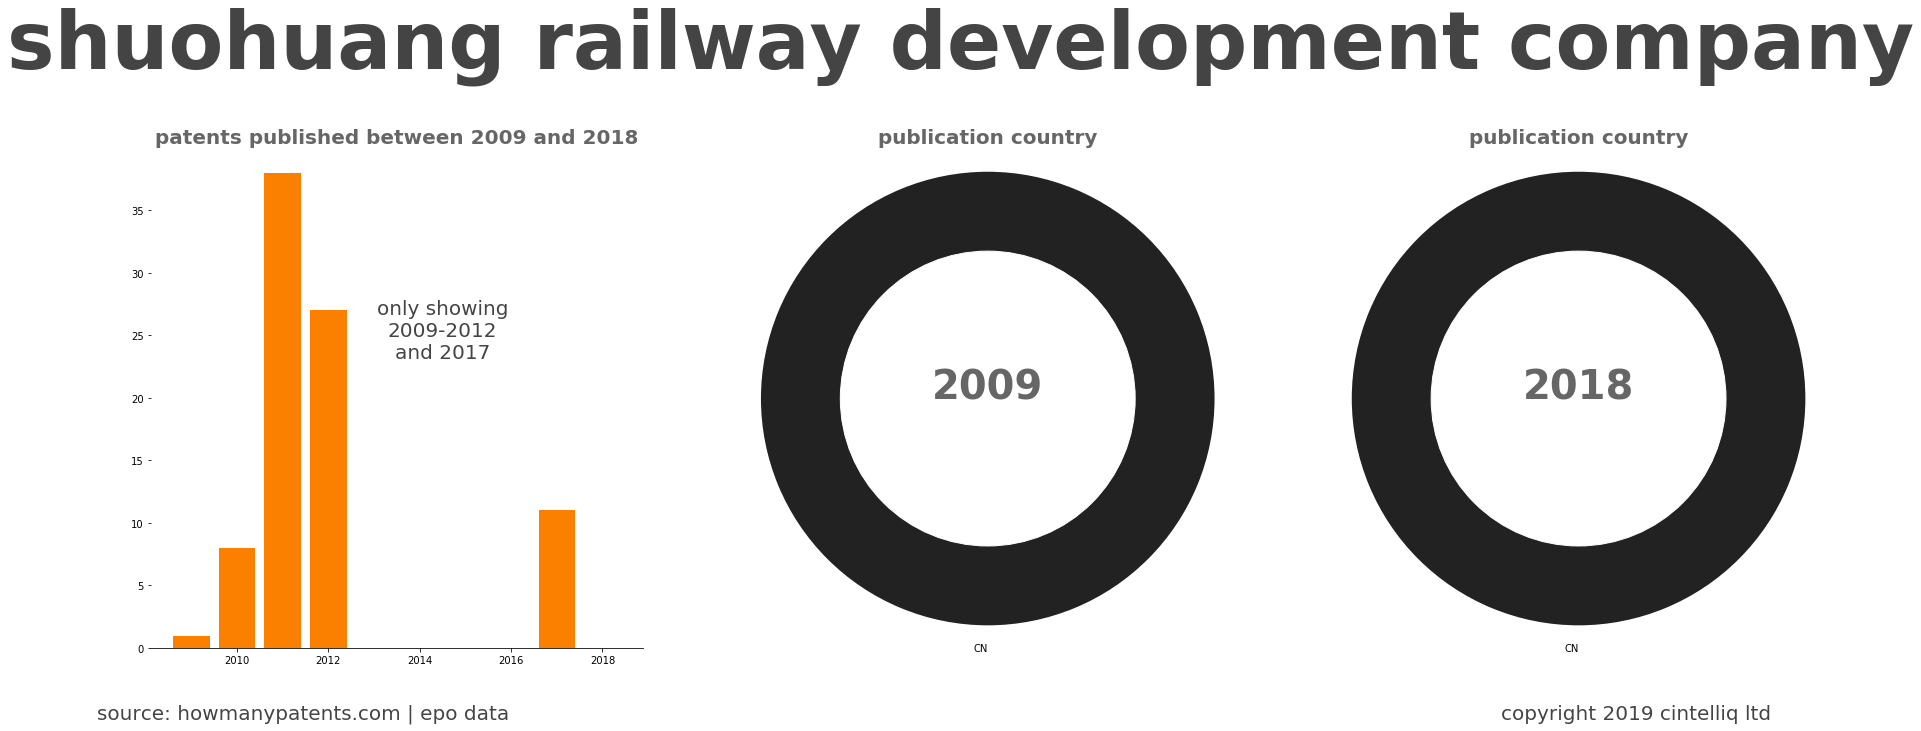 summary of patents for Shuohuang Railway Development Company